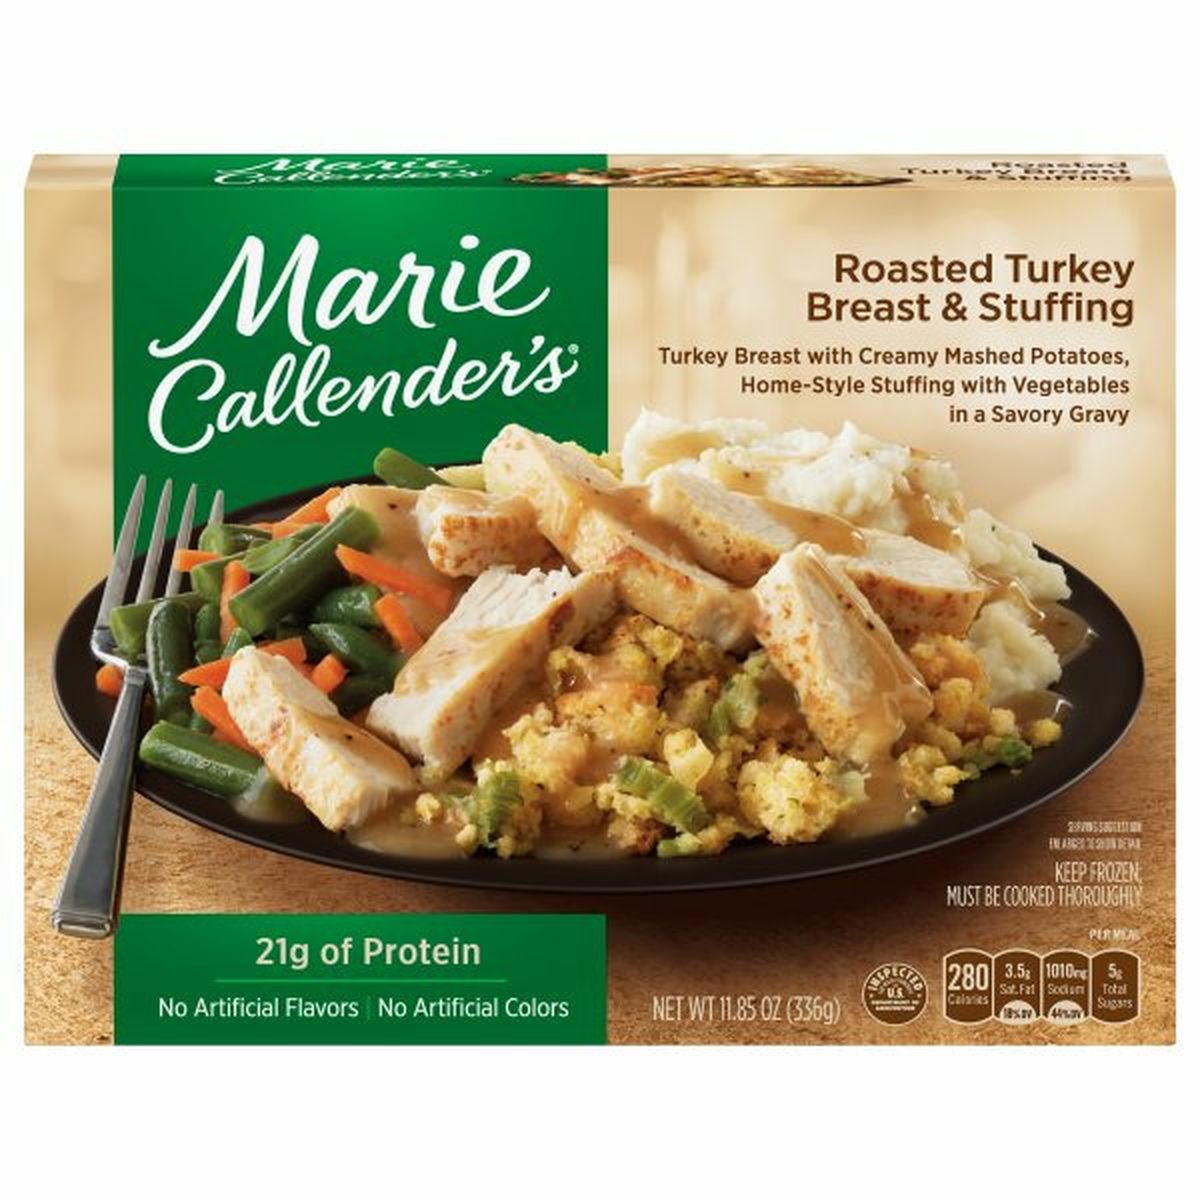 Calories in Marie Callender's Roasted Turkey Breast & Stuffing